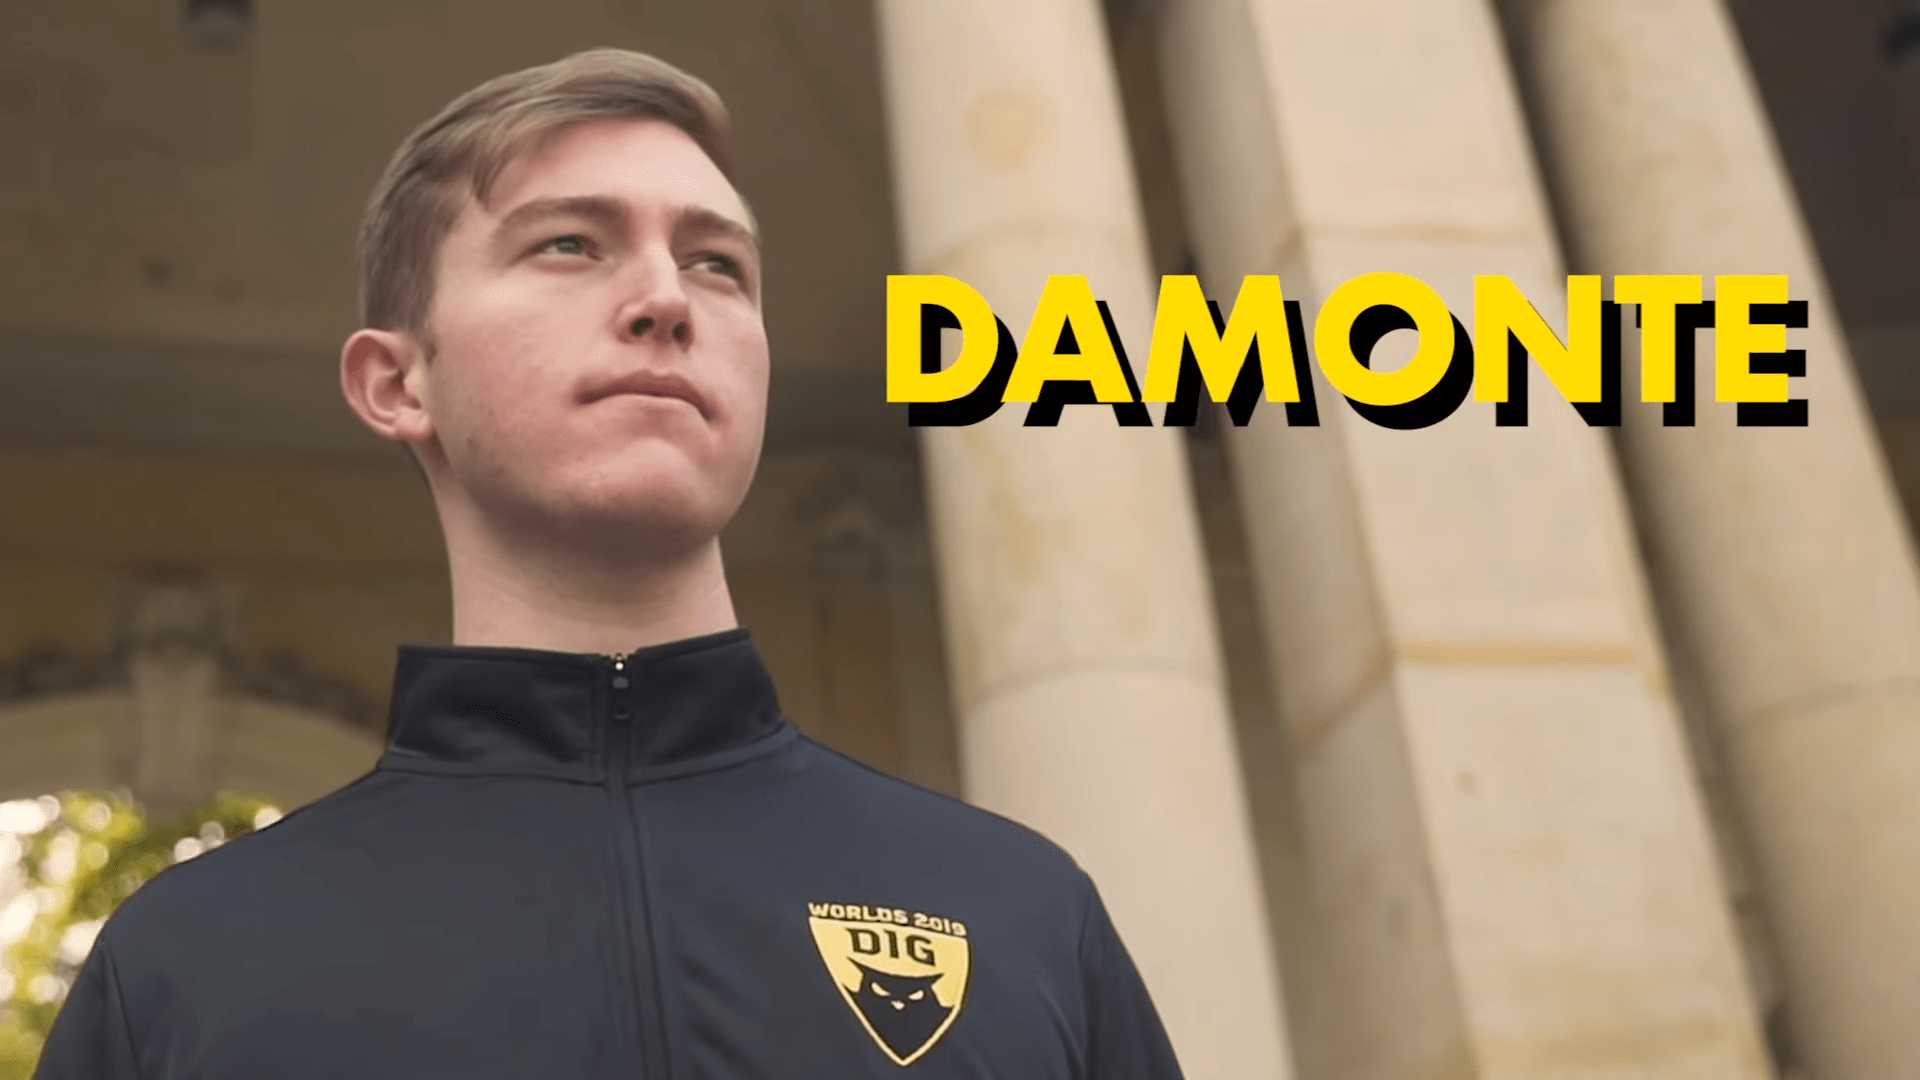 After A One Month Hiatus In Free Agency, Damonte Is Back With Dignitas For LCS 2020